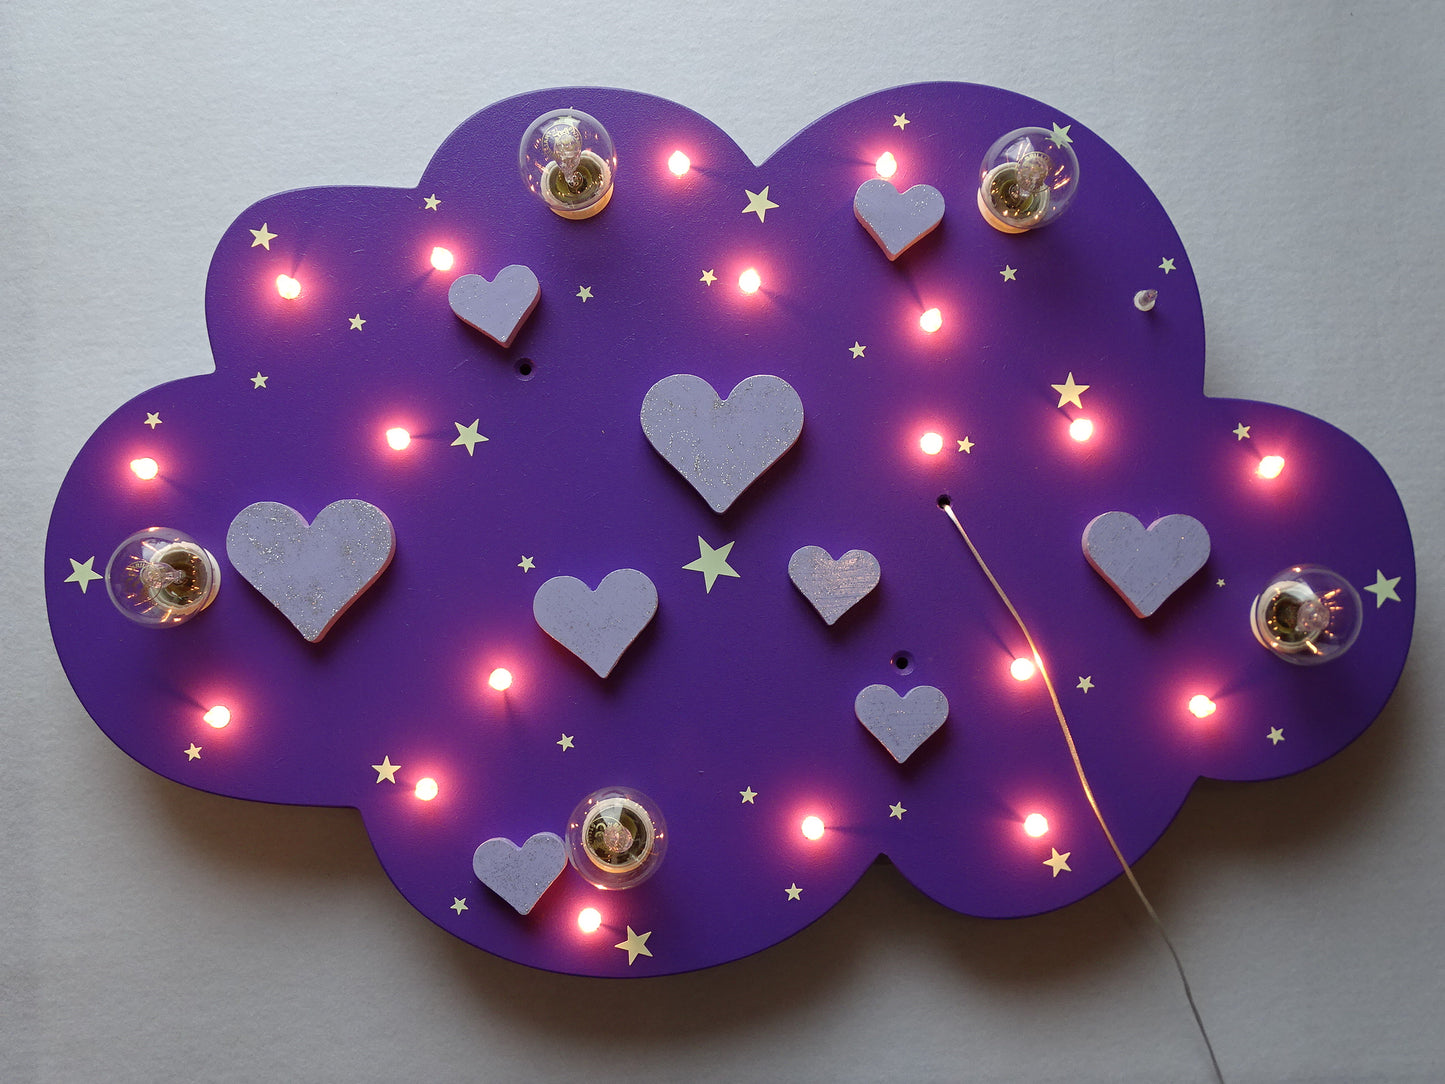 LED ceiling light "HEARTS" - with GLITTER!